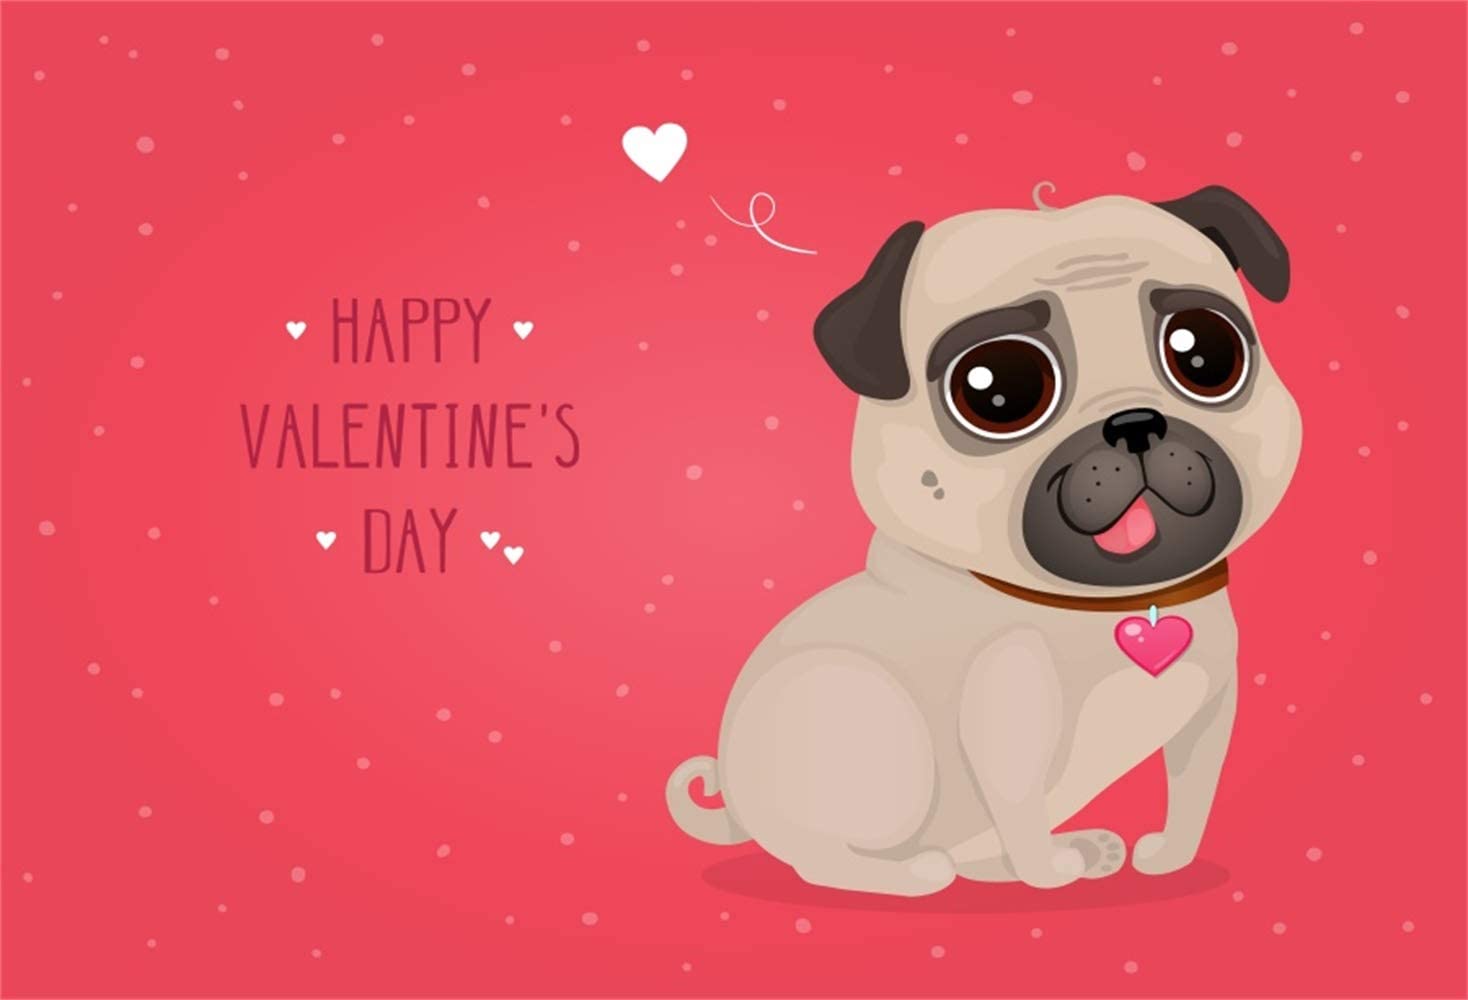 Amazon.com, Laeacco 7x5ft Happy Valentine's Day Greeting Card Backdrop Vinyl Cartoon Cute Doggy with Red Heart Bell Illustration Spots Red Background Lovers Couples Portrait Shoot Wedding Proposal Studio